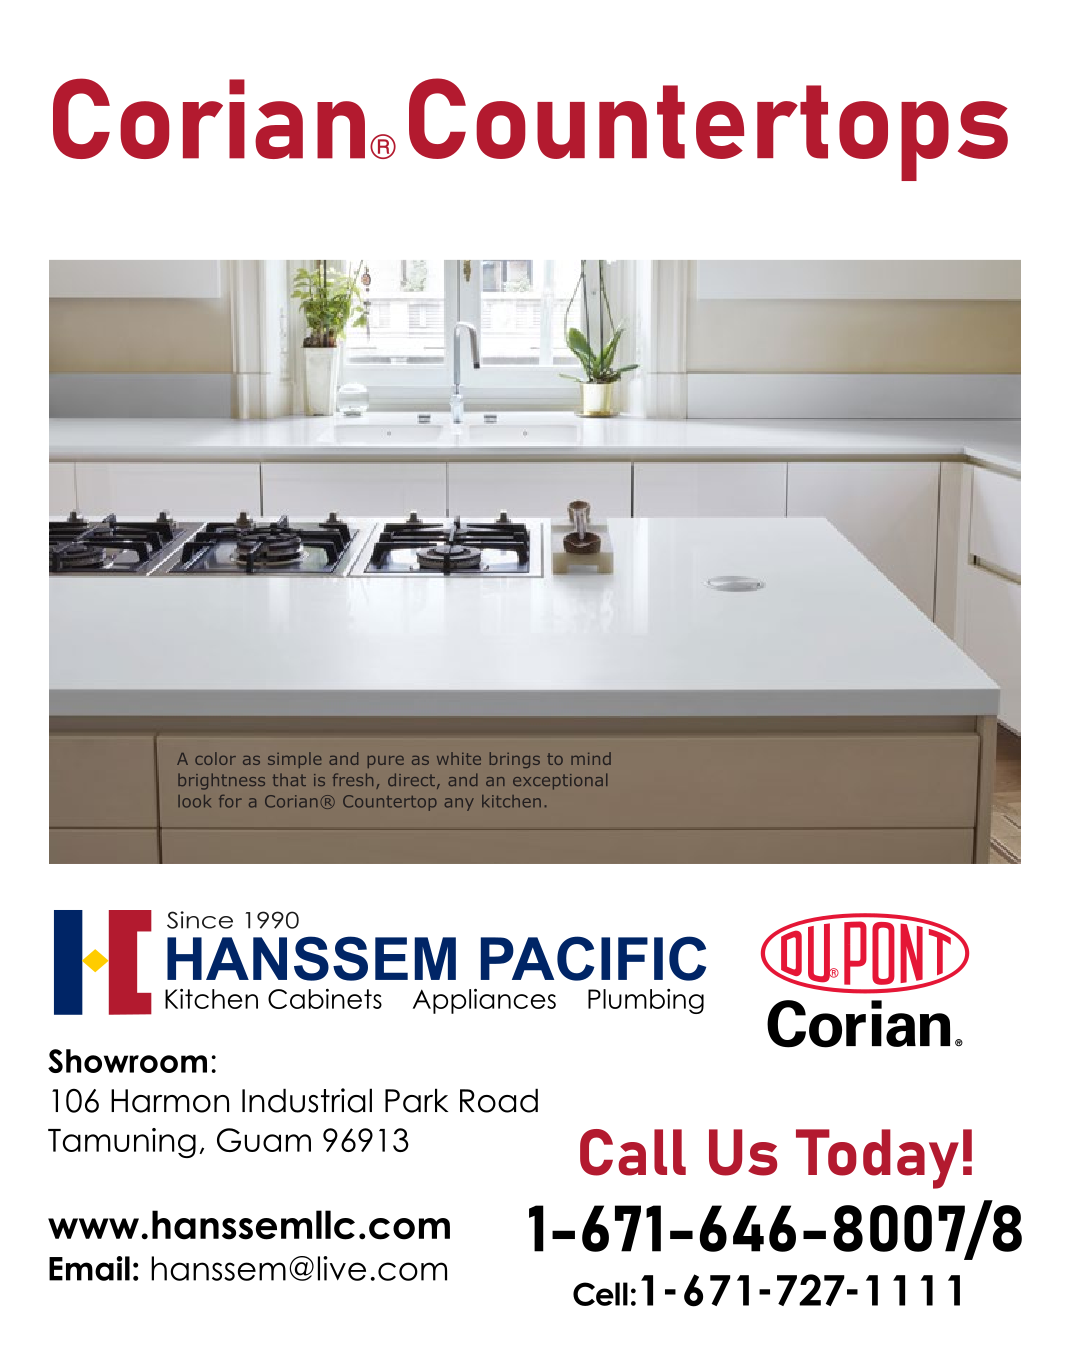 dupont-corian-countertops-by-hanssem-pacific